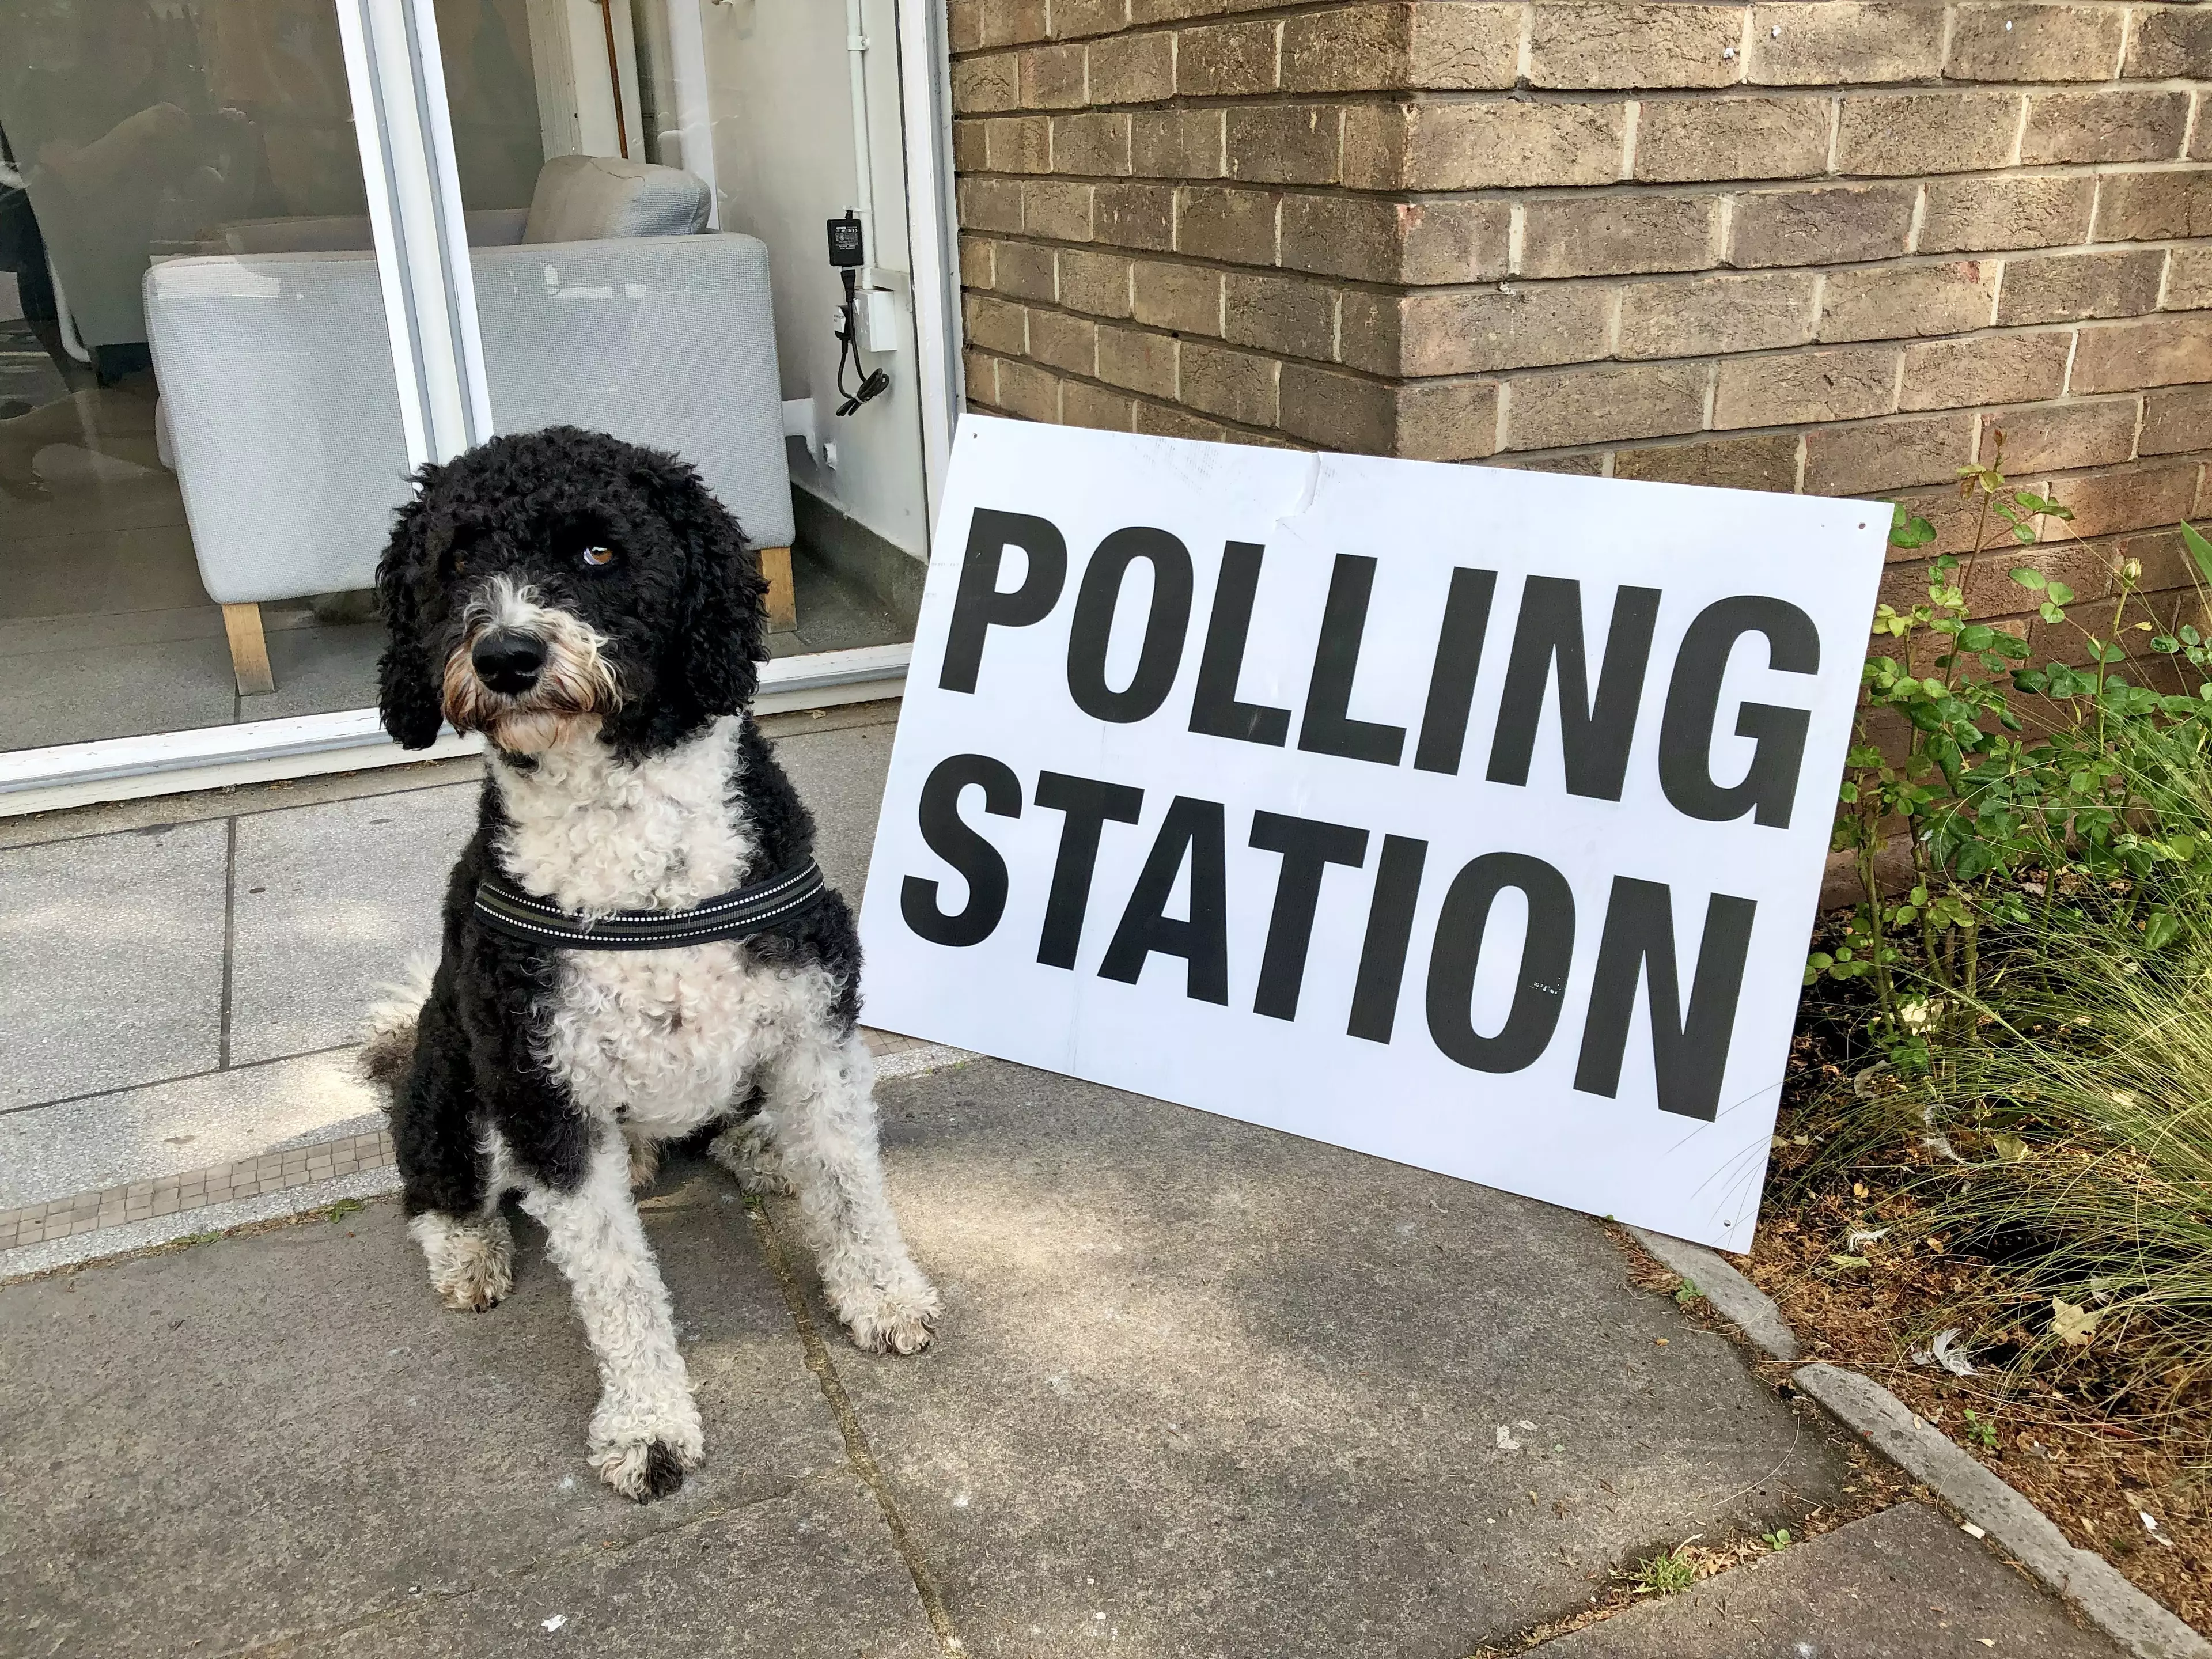 I may or may not be able to guarantee each polling station has a doggo outside it.